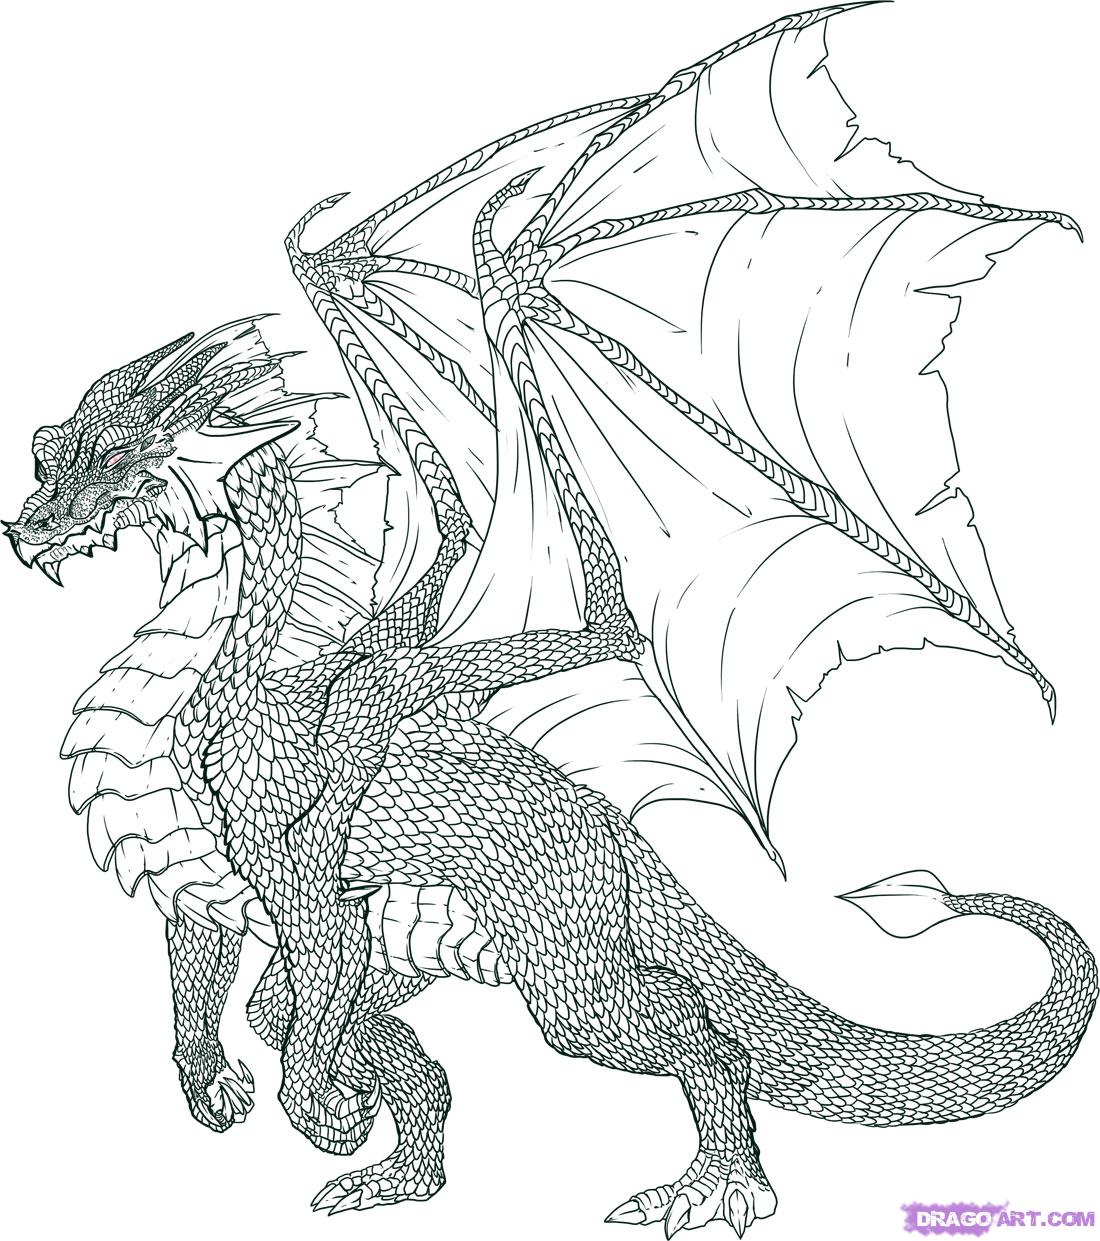 Featured image of post Full Body Dragon Drawing Outline To continue publishing please remove it or upload a different image